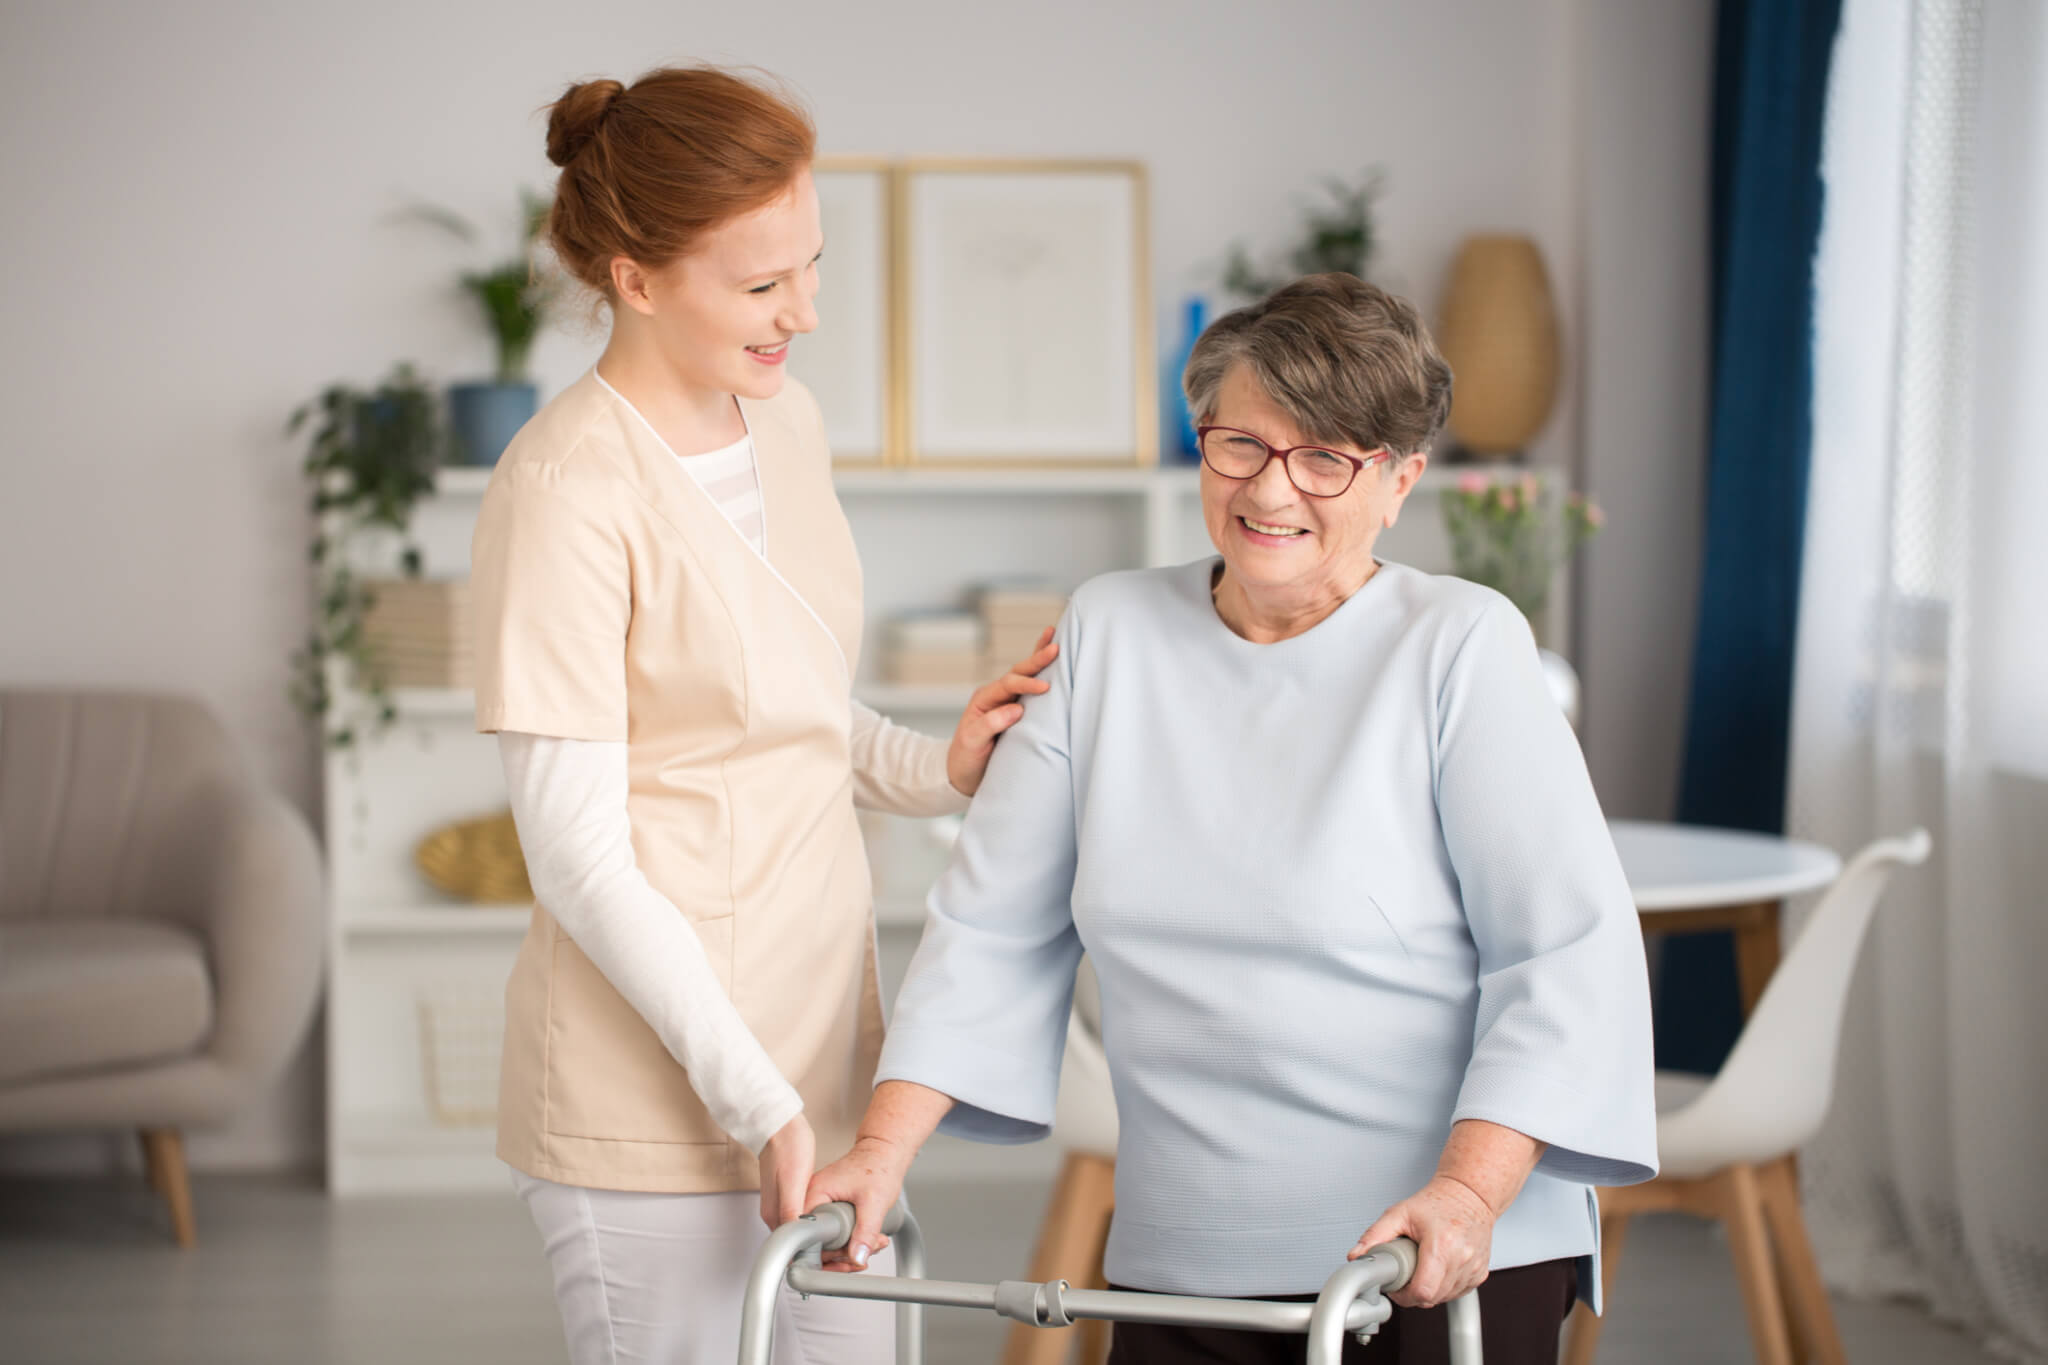 role of RNs in assisted living facilities - 2023 update